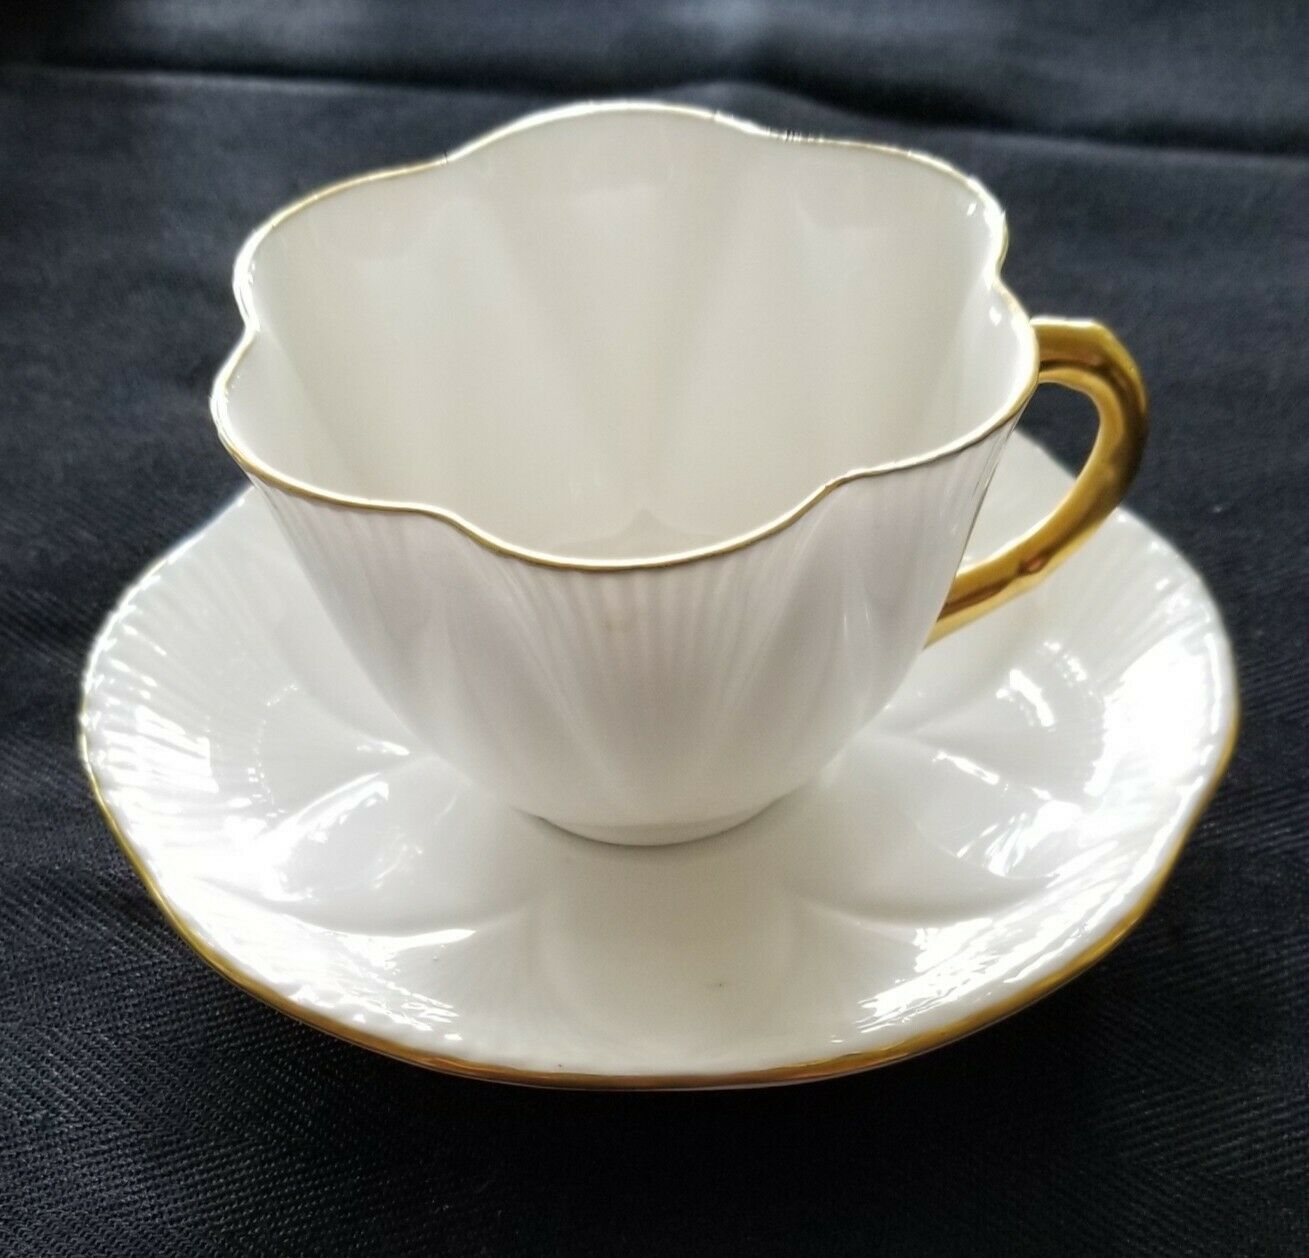 Vintage * Shelley White Bone China * Scalloped Teacup with Saucer - gold rim